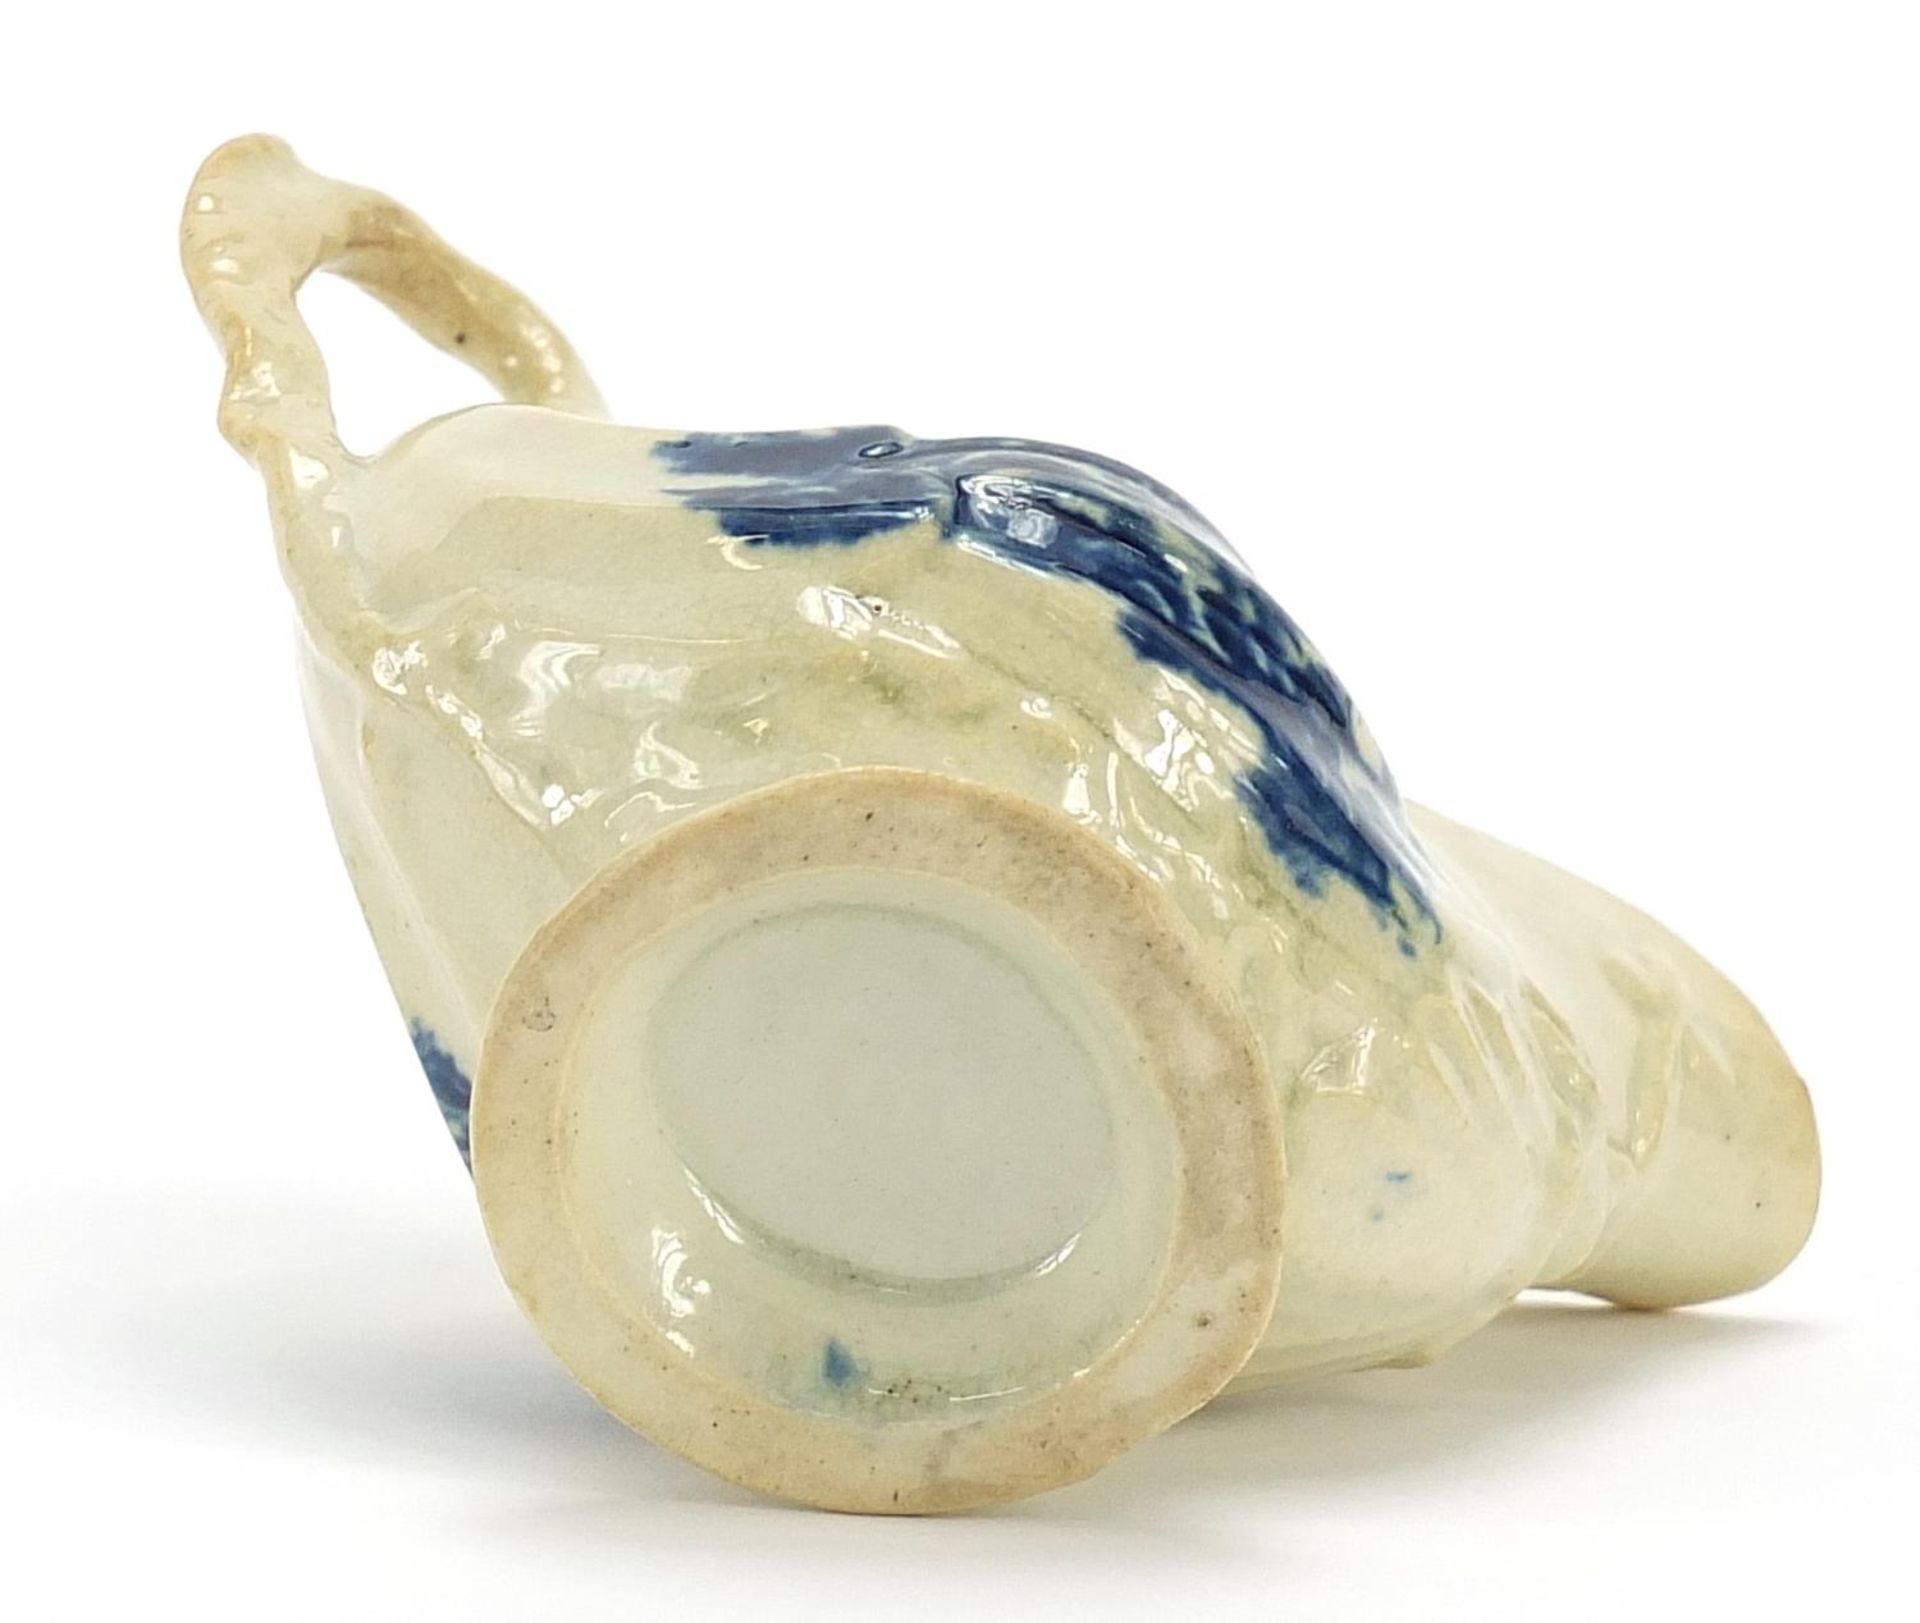 Late 18th century Liverpool porcelain cream jug, 11.5cm in length - Image 3 of 3